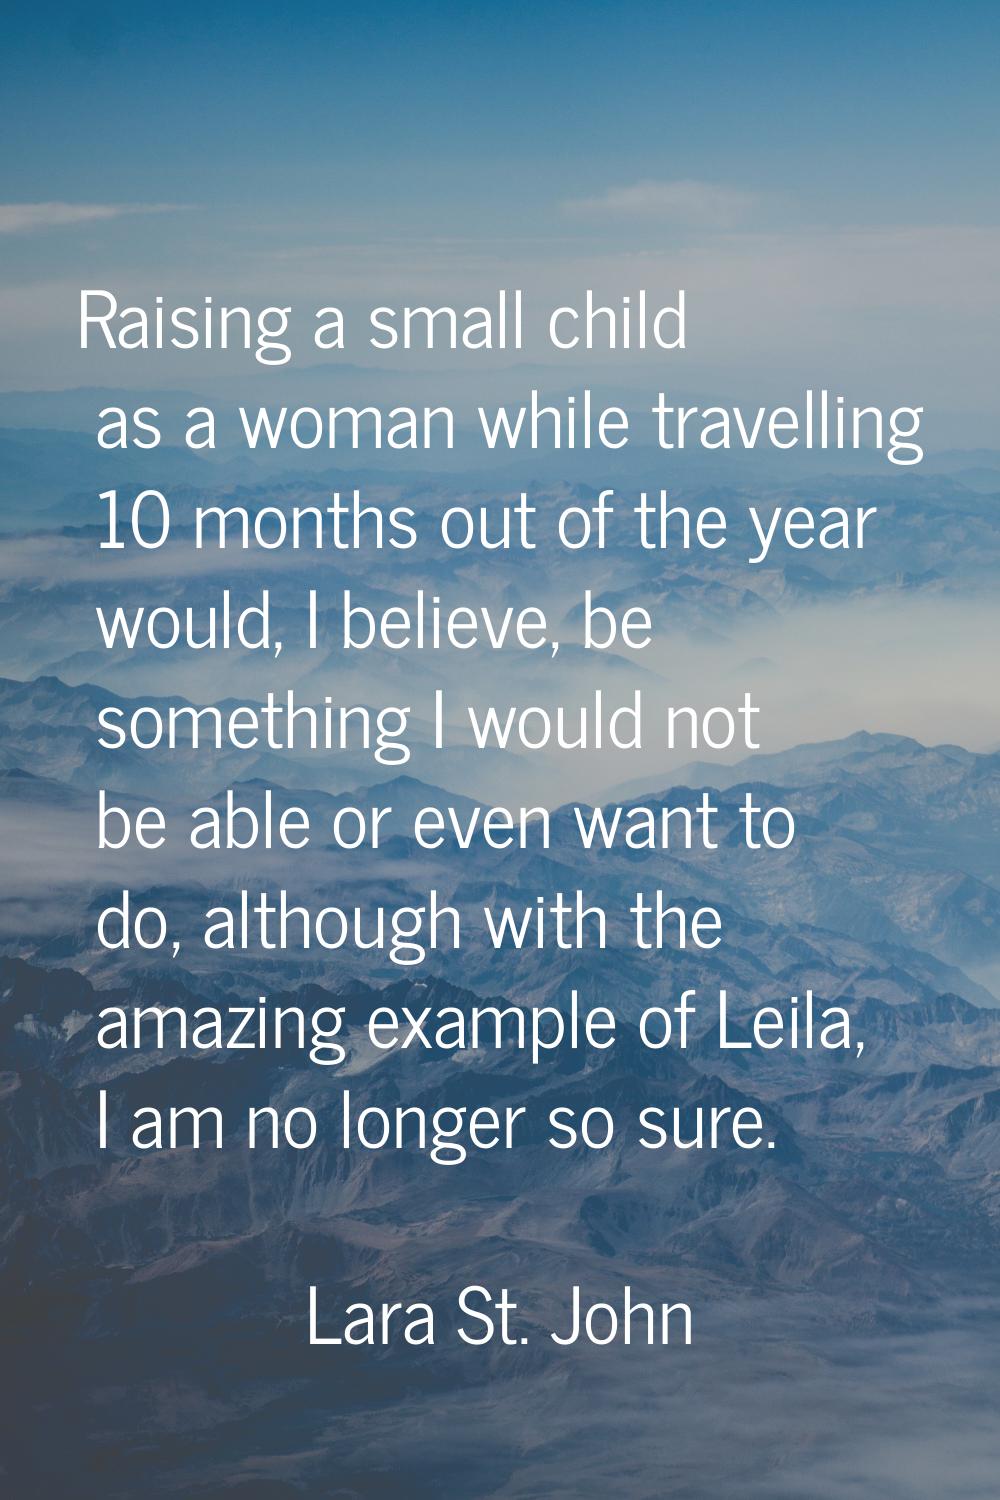 Raising a small child as a woman while travelling 10 months out of the year would, I believe, be so